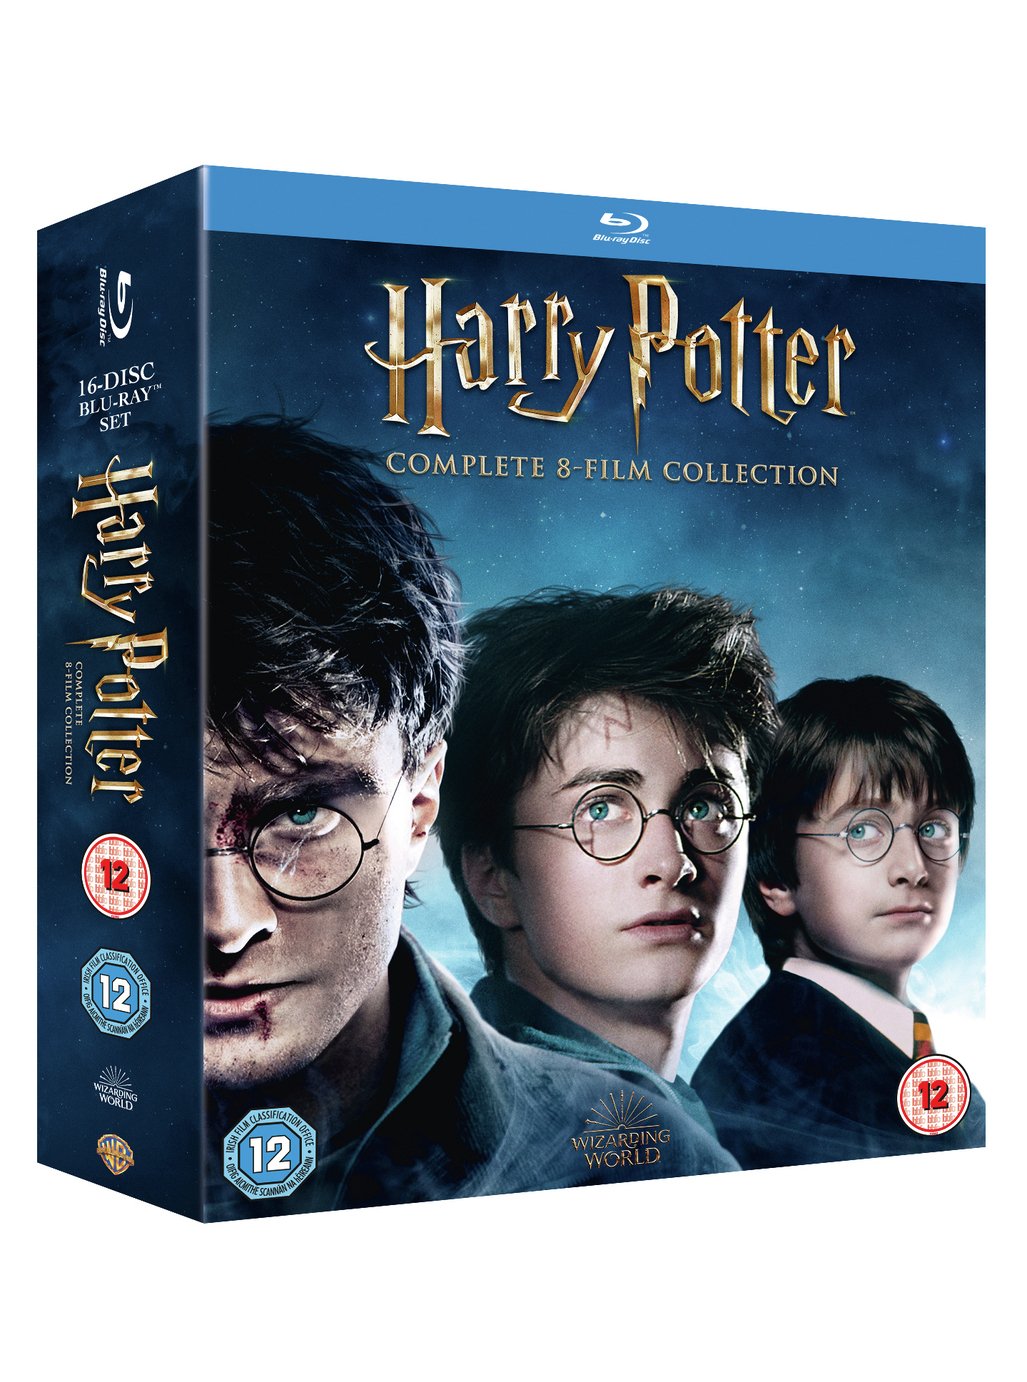 Harry Potter: The Complete Blu-Ray Box Set Review